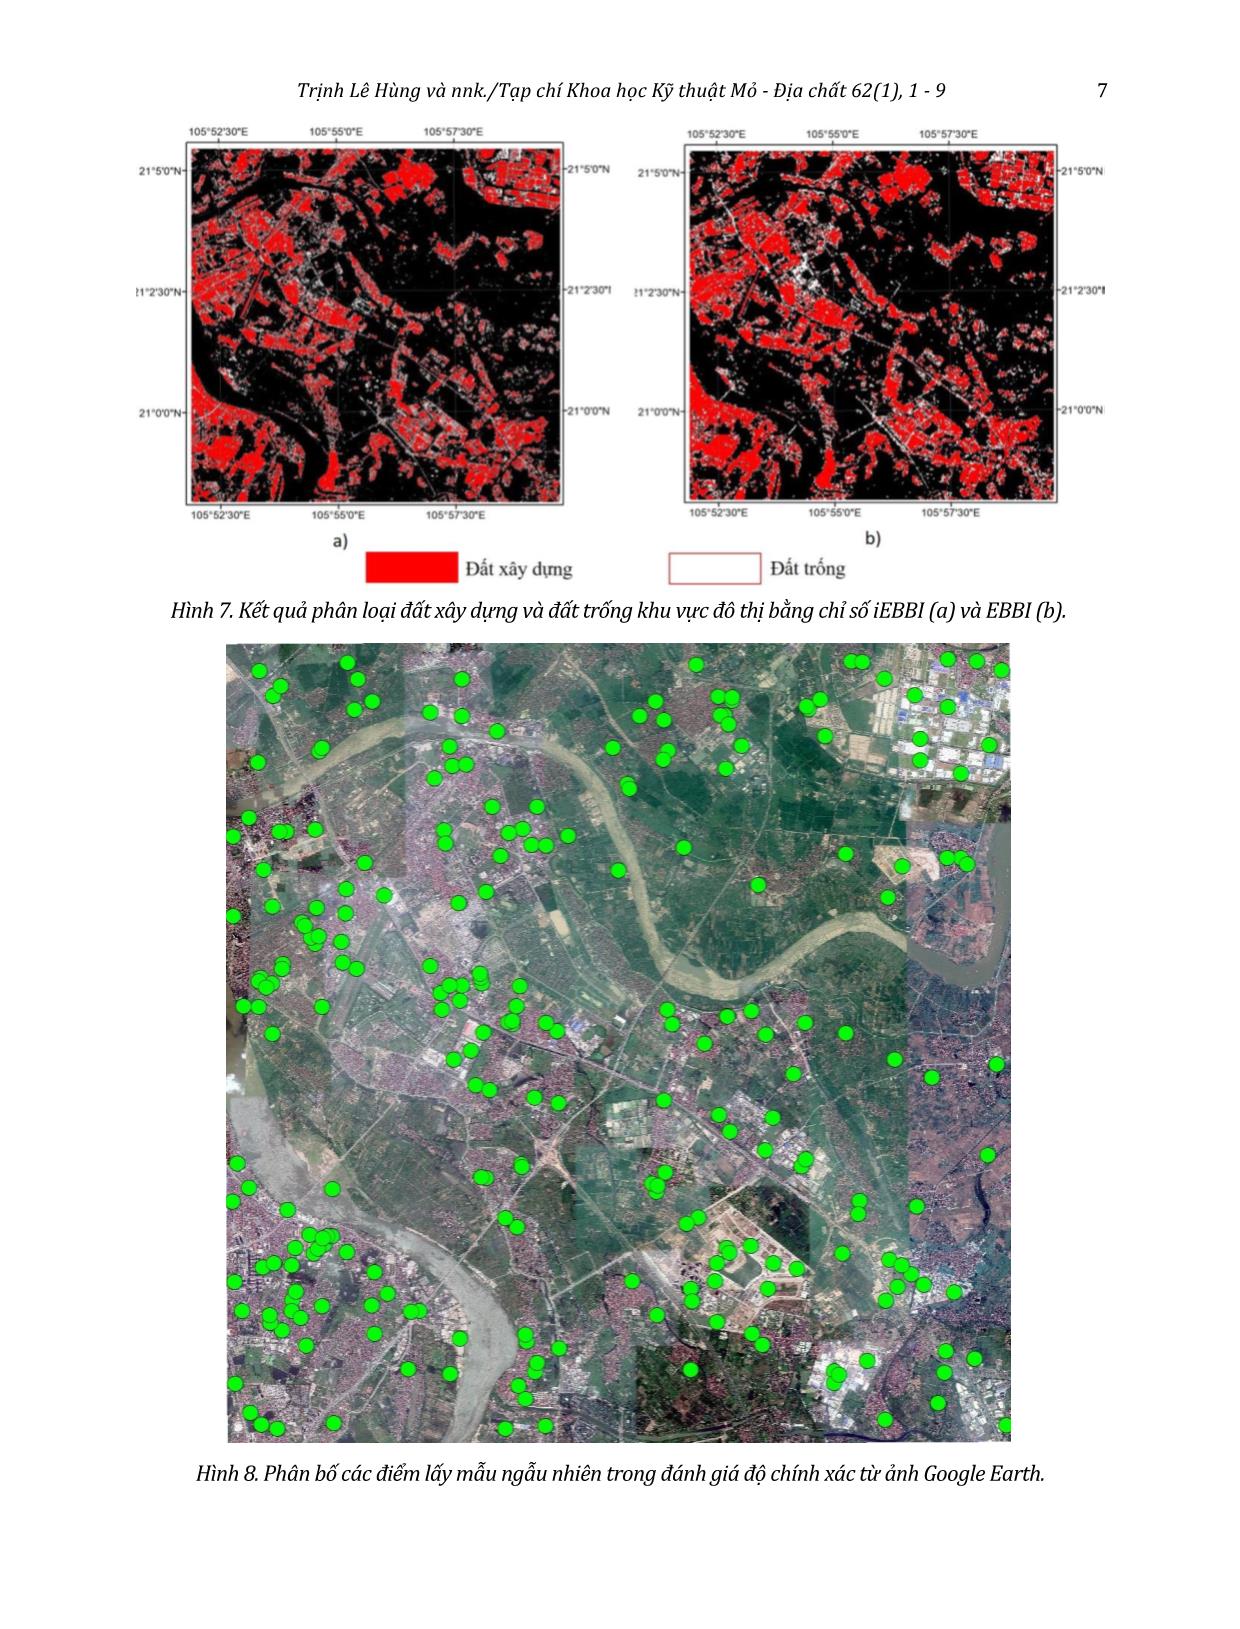 A development of the Enhanced Built-Up and Bareness Index (EBBI) based on combination of multi-resolution Landsat 8 and Sentinel 2 MSI images trang 7